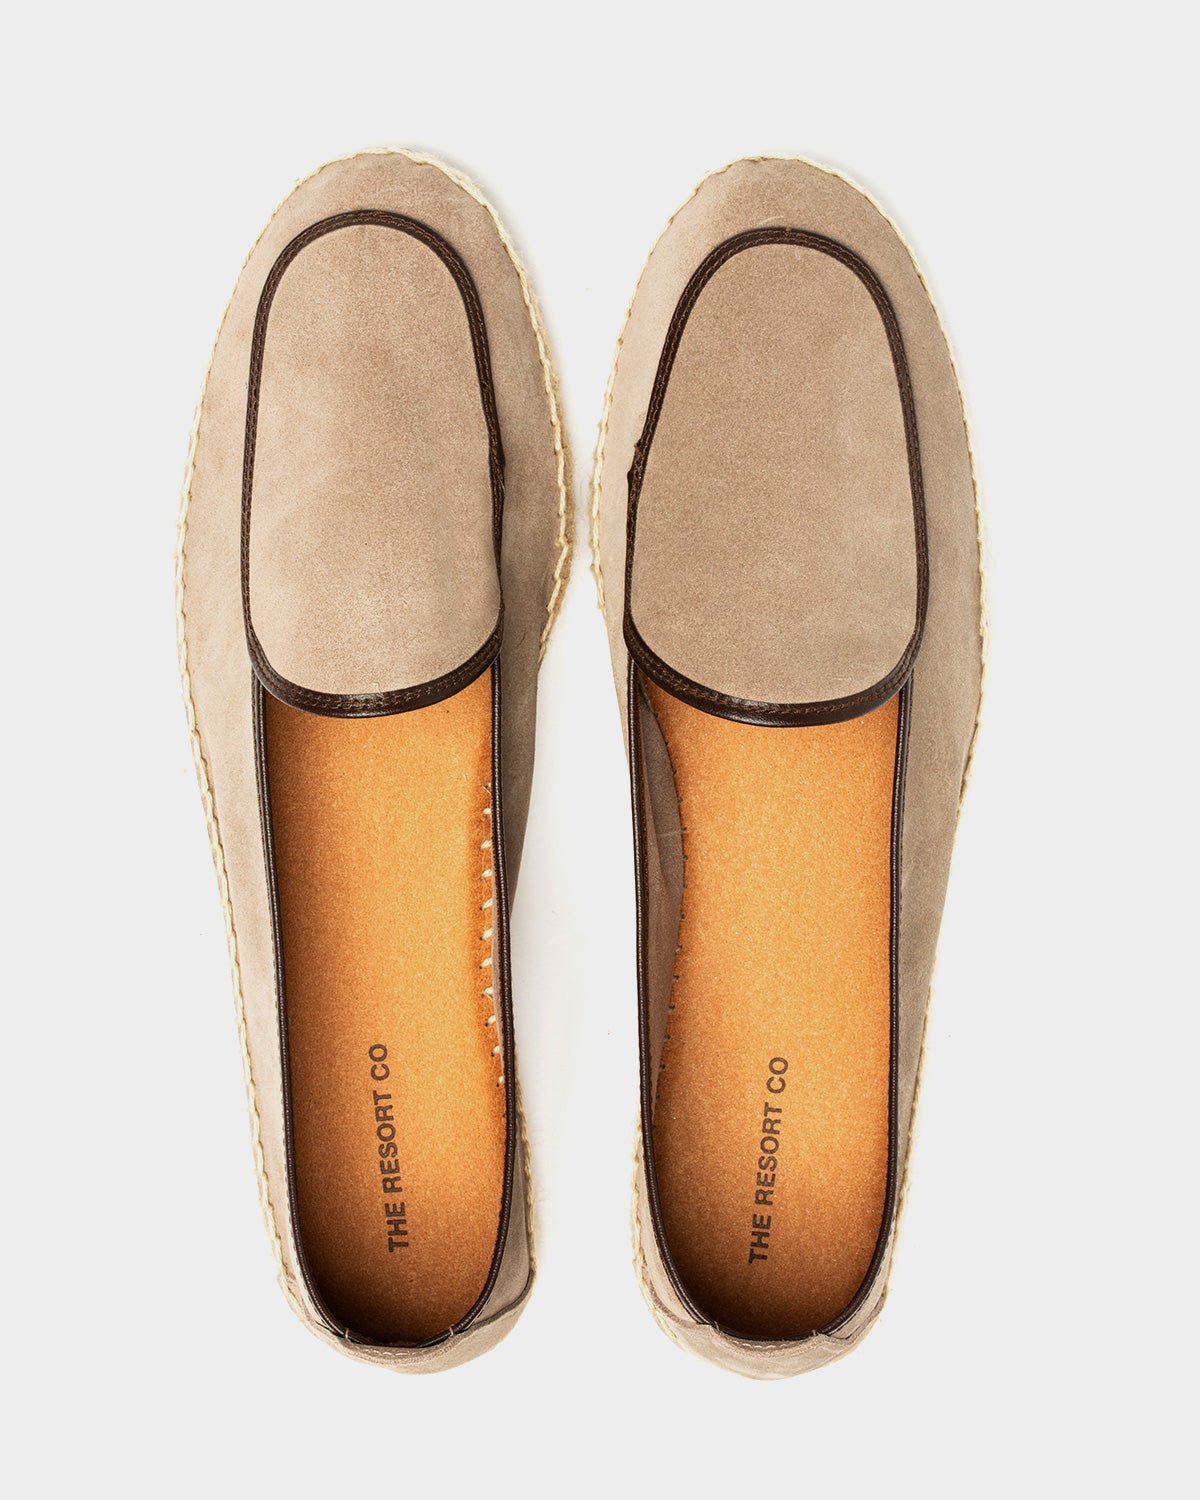 Espadrilles Belgian Loafer Style Sand Suede - THE RESORT CO